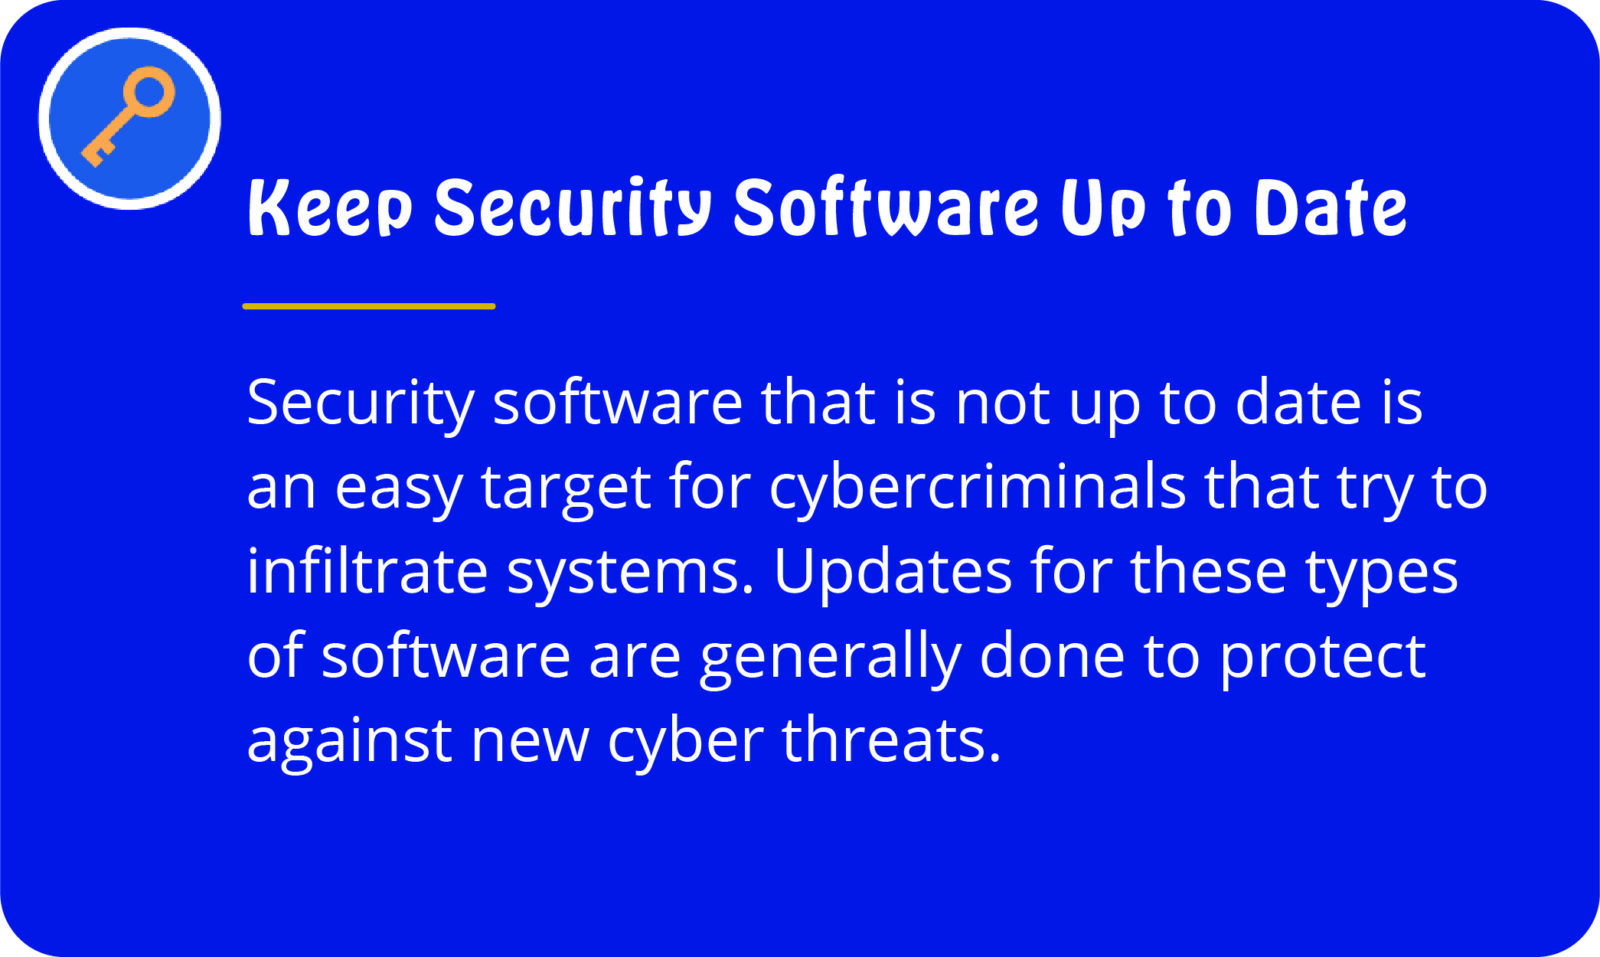 Tips for keeping security software up to date.